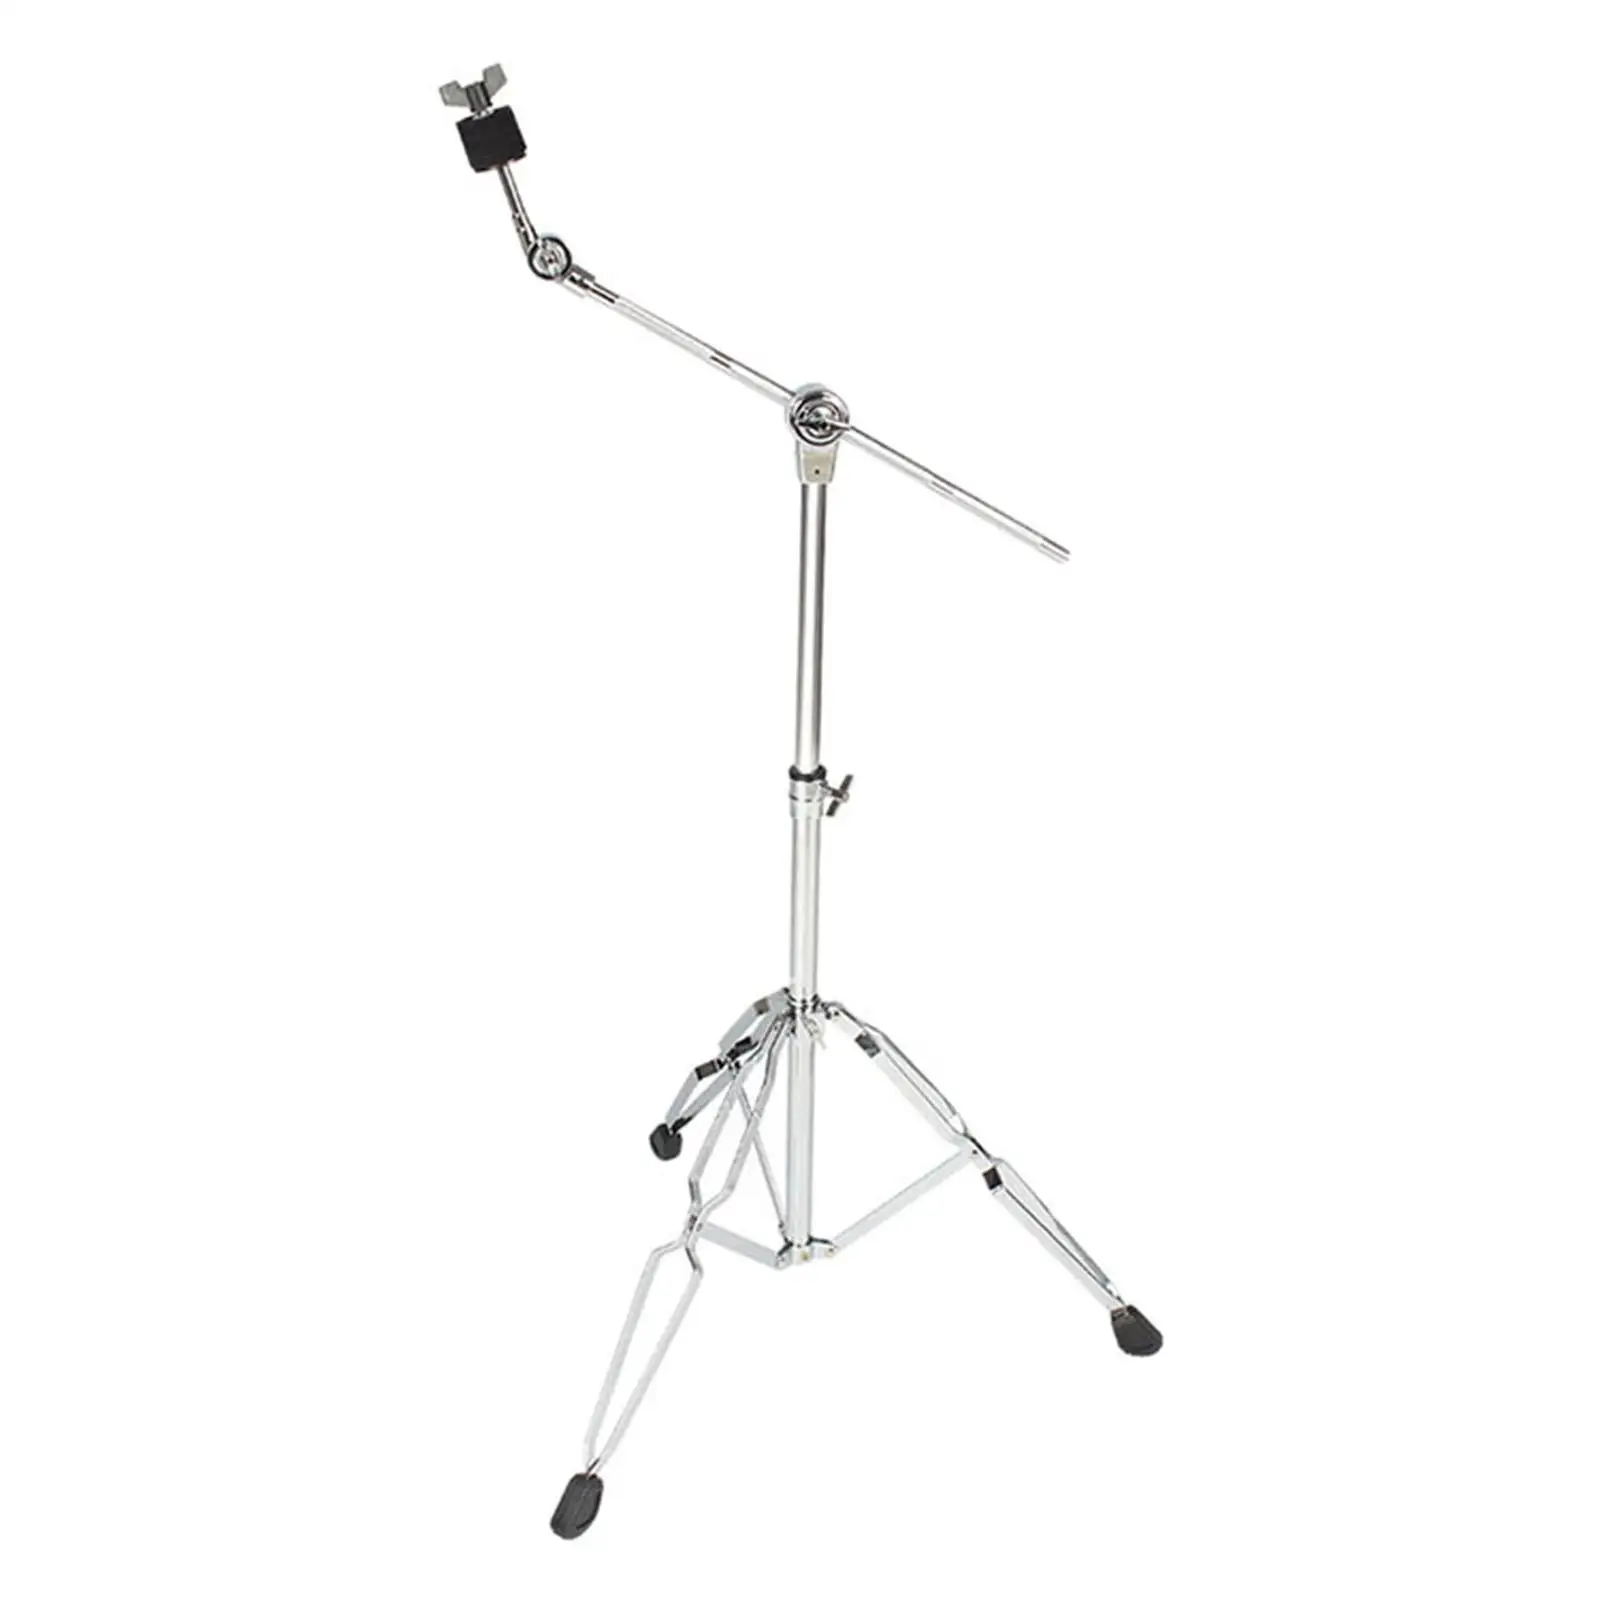 Cymbal Stand Adjustable Foldable Full Metal Universal Stable Accessories